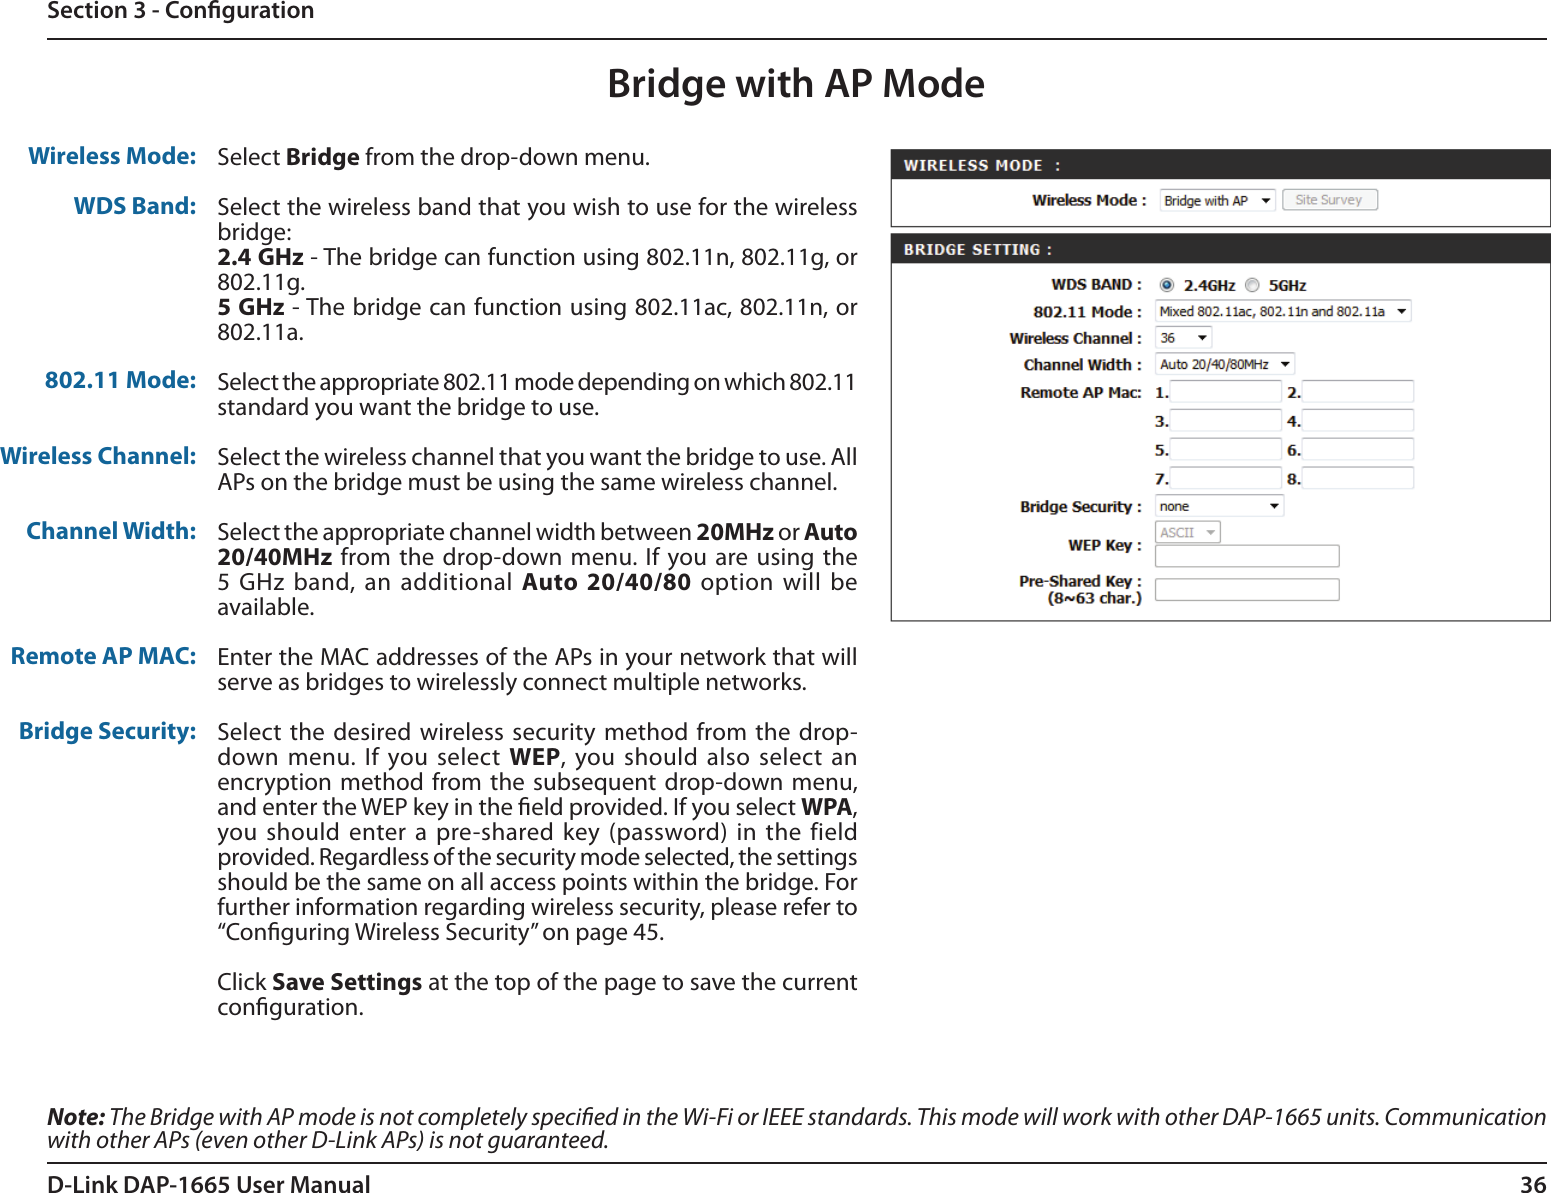 36D-Link DAP-1665 User ManualSection 3 - CongurationBridge with AP ModeNote: The Bridge with AP mode is not completely specied in the Wi-Fi or IEEE standards. This mode will work with other DAP-1665 units. Communication with other APs (even other D-Link APs) is not guaranteed.Wireless Mode:WDS Band:802.11 Mode:Wireless Channel:Channel Width:Remote AP MAC:Bridge Security:Select Bridge from the drop-down menu.Select the wireless band that you wish to use for the wireless bridge:2.4 GHz - The bridge can function using 802.11n, 802.11g, or 802.11g.5 GHz - The bridge can function using 802.11ac, 802.11n, or 802.11a.Select the appropriate 802.11 mode depending on which 802.11 standard you want the bridge to use. Select the wireless channel that you want the bridge to use. All APs on the bridge must be using the same wireless channel.Select the appropriate channel width between 20MHz or Auto 20/40MHz from the  drop-down menu. If you are using the 5 GHz band, an  additional  Auto 20/40/80  option will be available. Enter the MAC addresses of the APs in your network that will serve as bridges to wirelessly connect multiple networks.Select  the desired wireless security method from the  drop-down menu. If you select WEP, you should also select an encryption method from the subsequent drop-down menu, and enter the WEP key in the eld provided. If you select WPA, you should enter a pre-shared key (password) in the  field provided. Regardless of the security mode selected, the settings should be the same on all access points within the bridge. For further information regarding wireless security, please refer to “Conguring Wireless Security” on page 45.Click Save Settings at the top of the page to save the current conguration. 